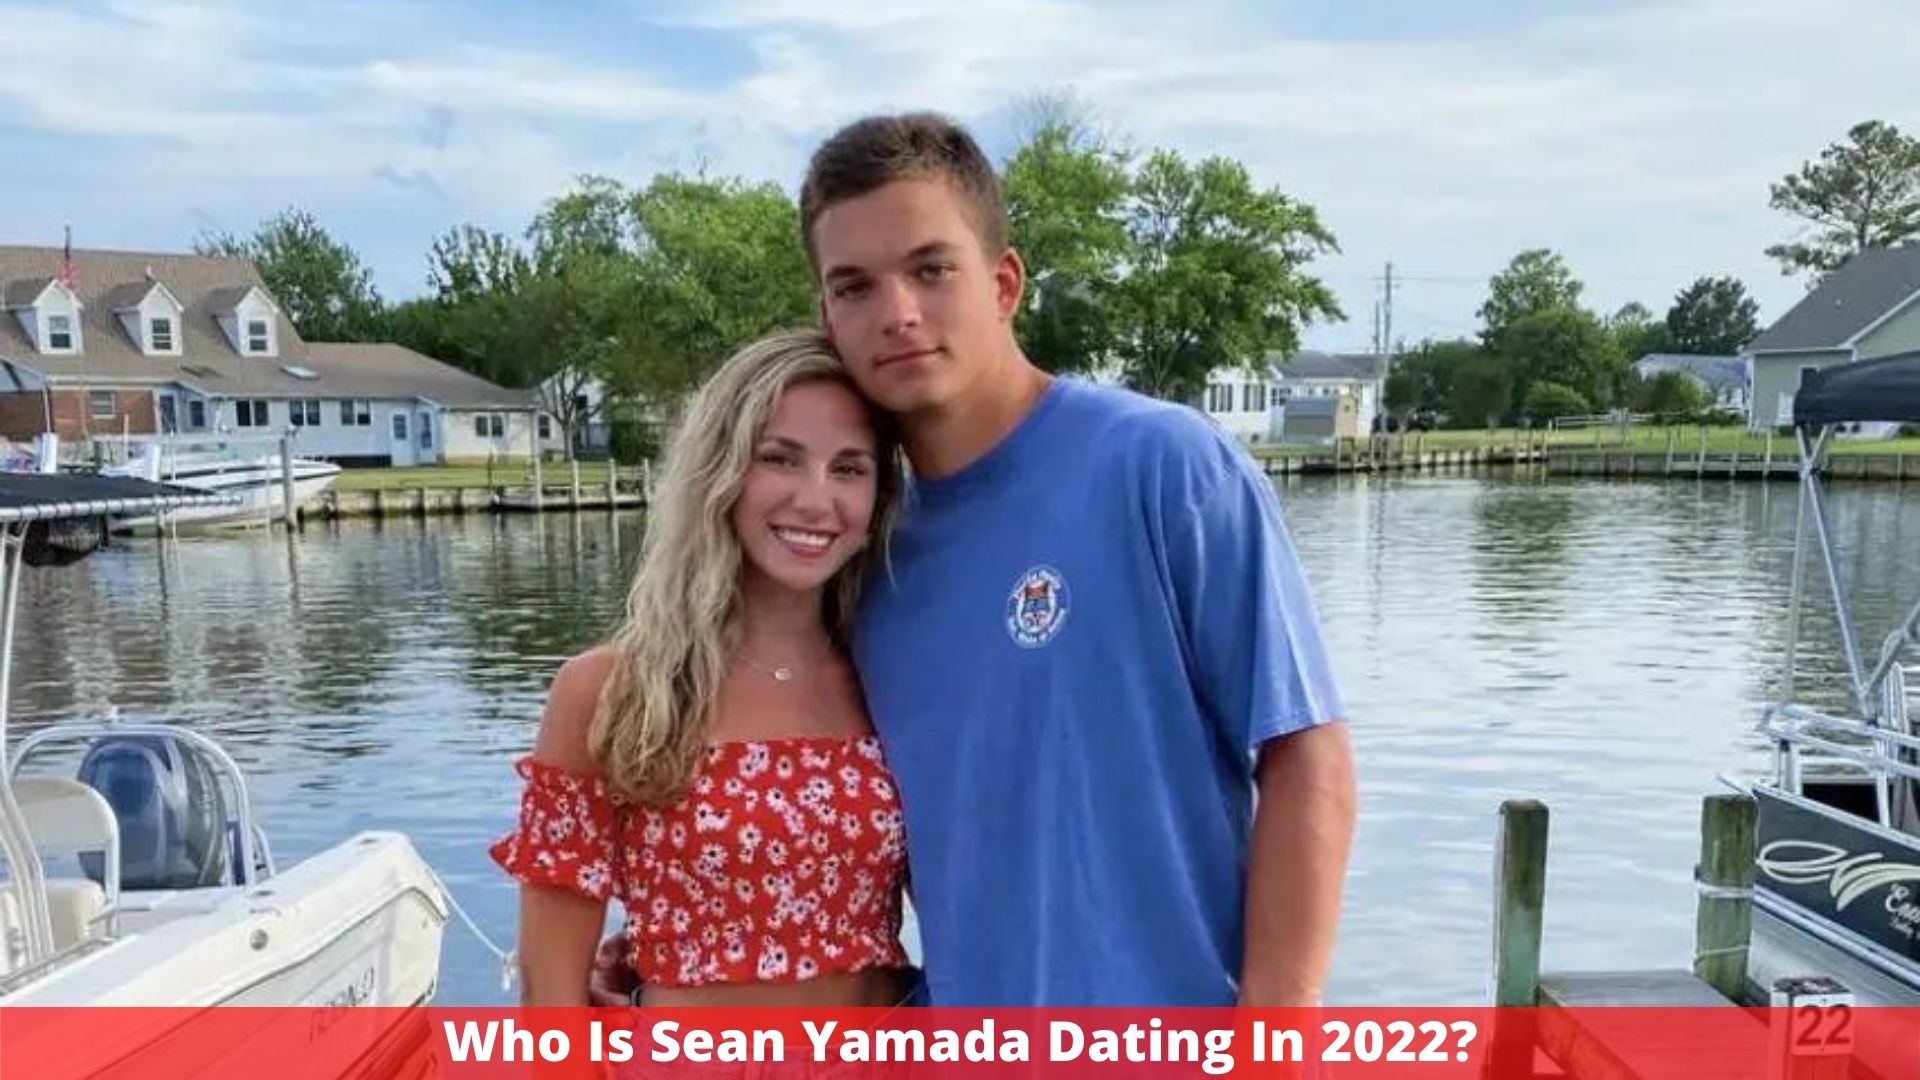 Who Is Sean Yamada Dating In 2022?